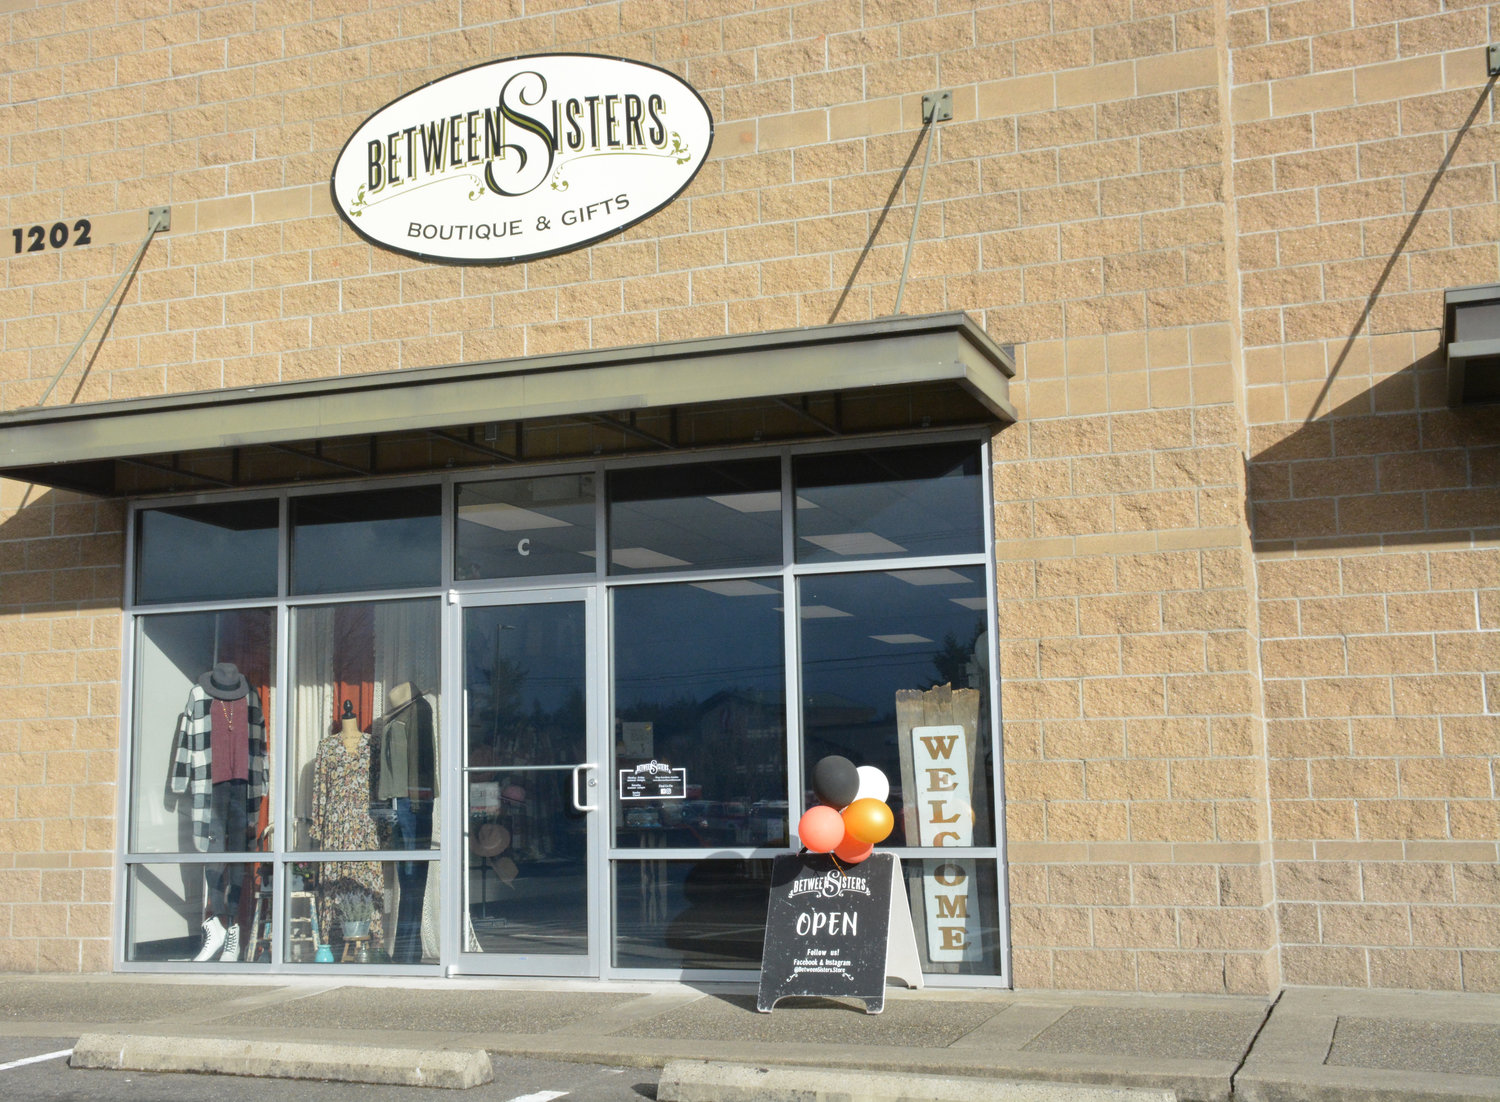 Between Sisters Boutique is located at 1202 E. Yelm Ave., Suite C, in the Dairy Queen plaza.